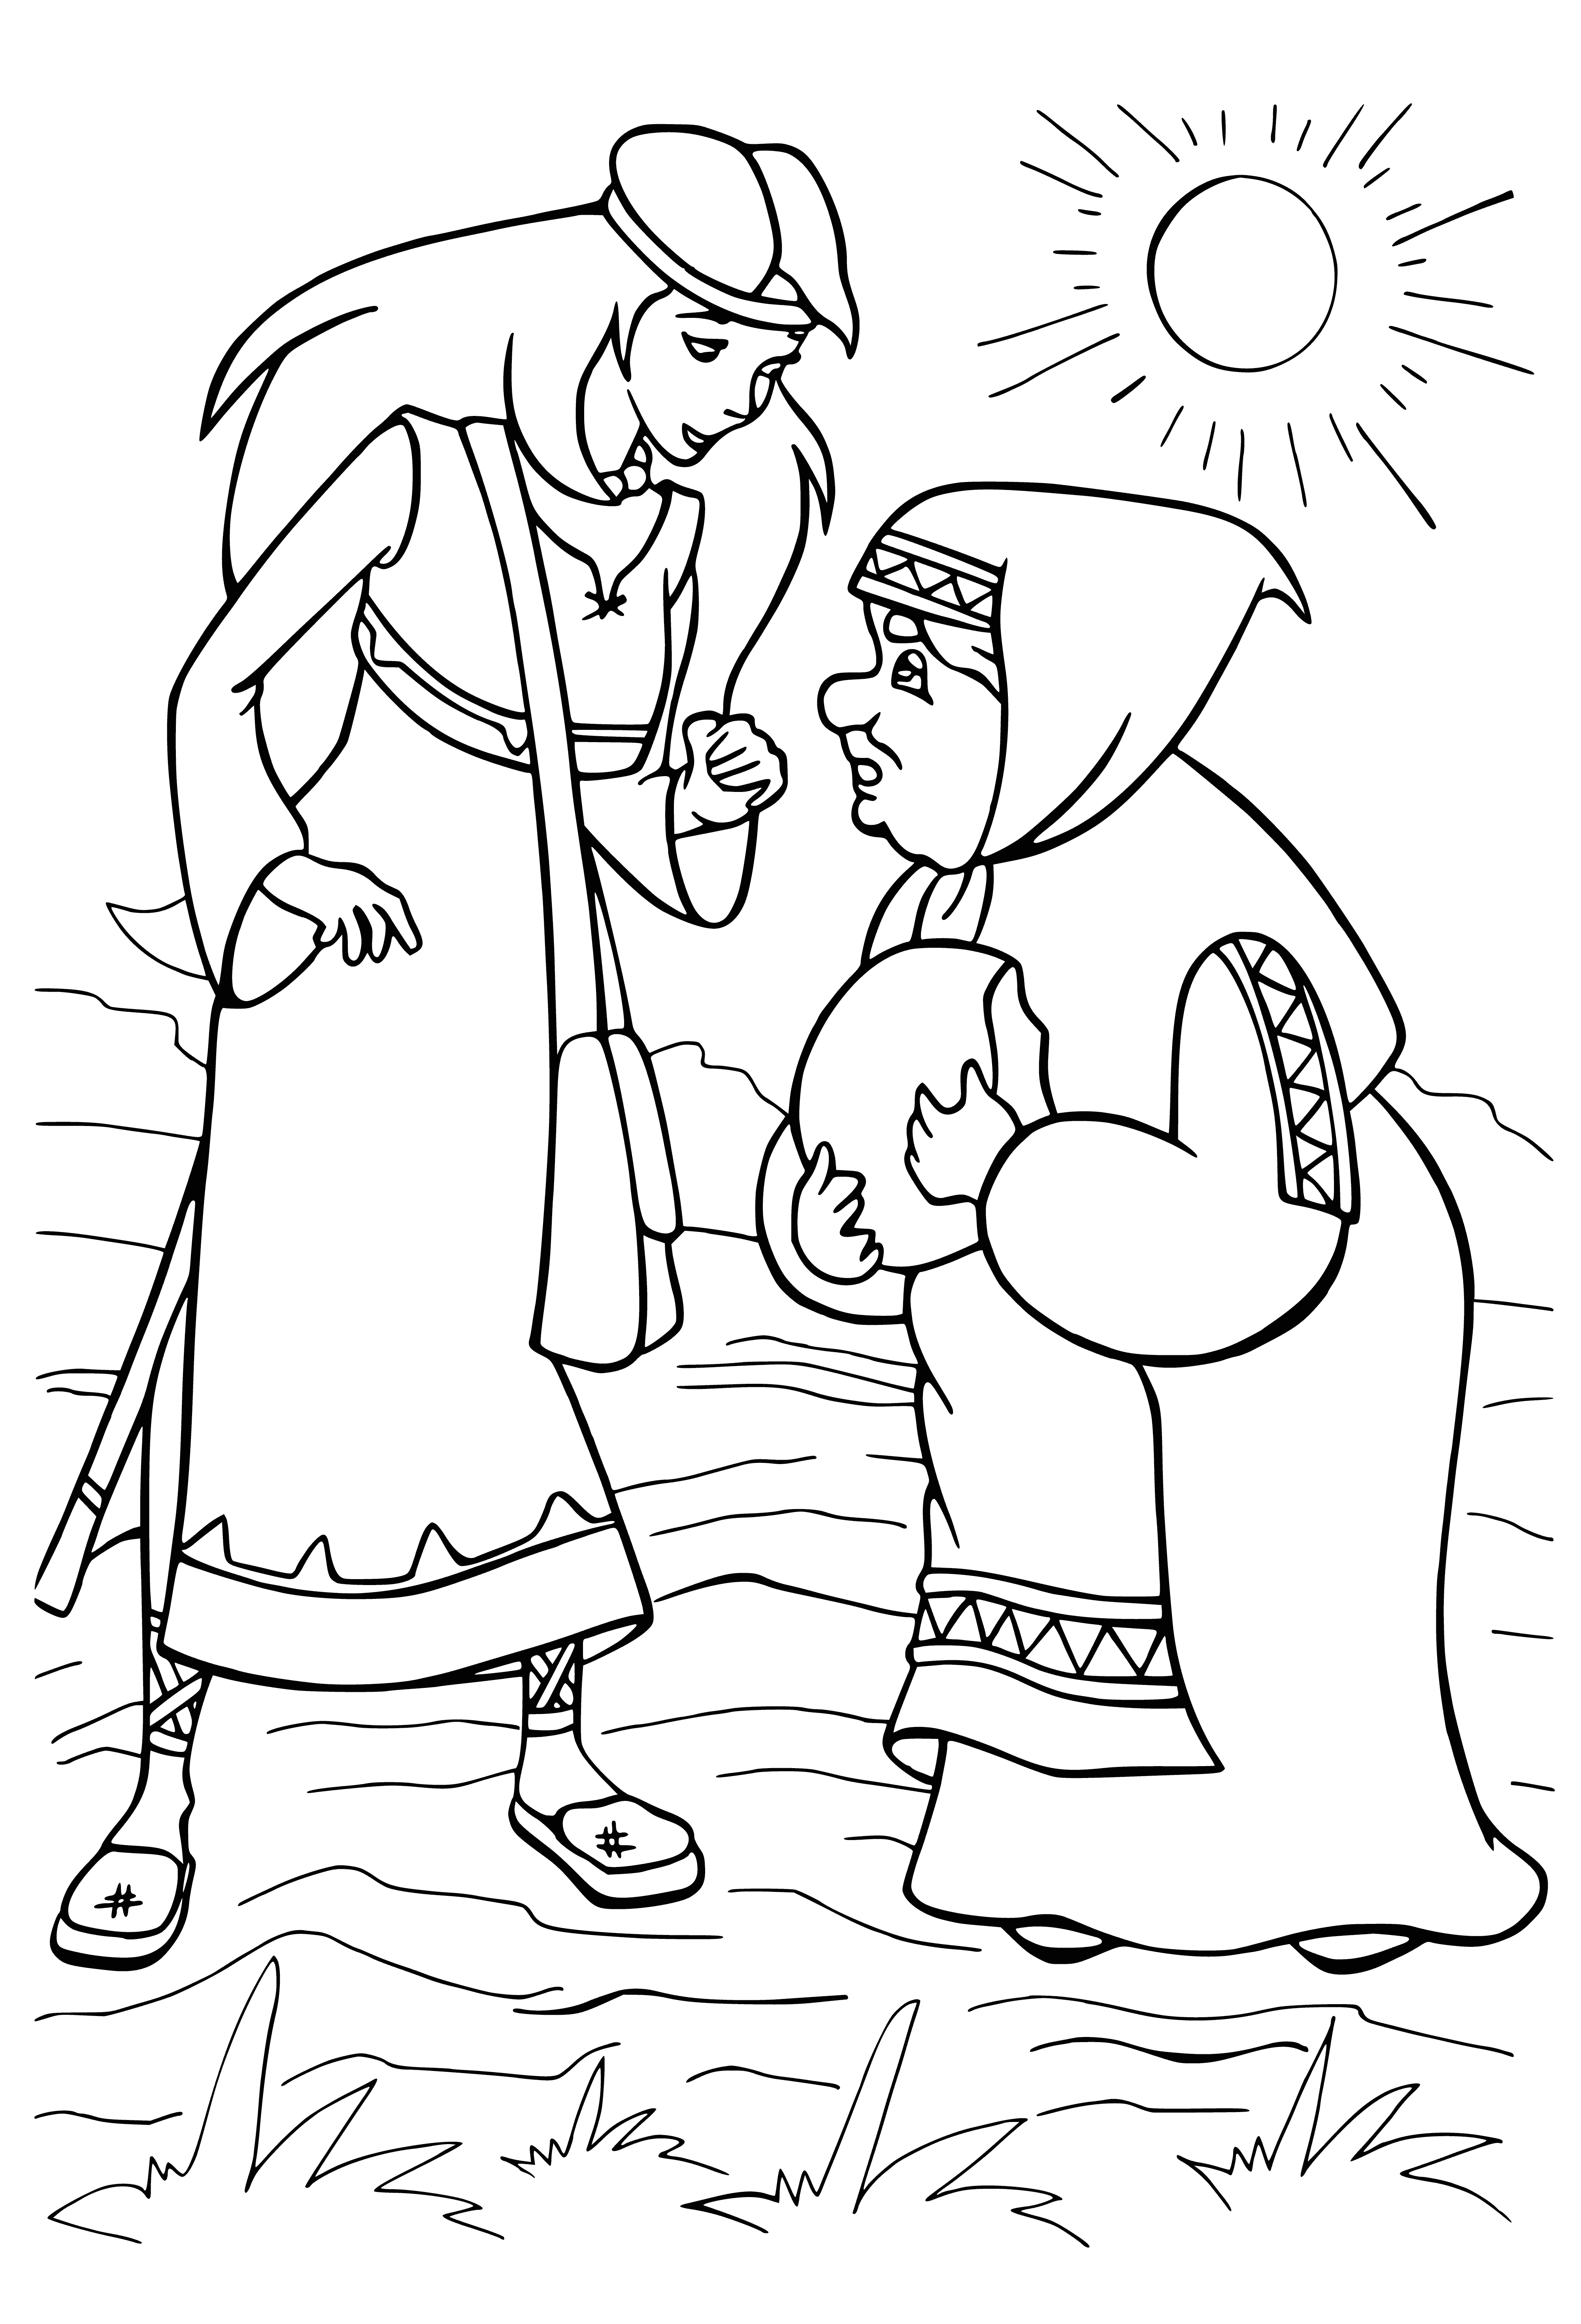 coloring page: Folk tale characters Ilya and Nightingale stand side-by-side in a coloring page: Ilya with a sword and Nightingale with her stolen goods, staring at the viewer.